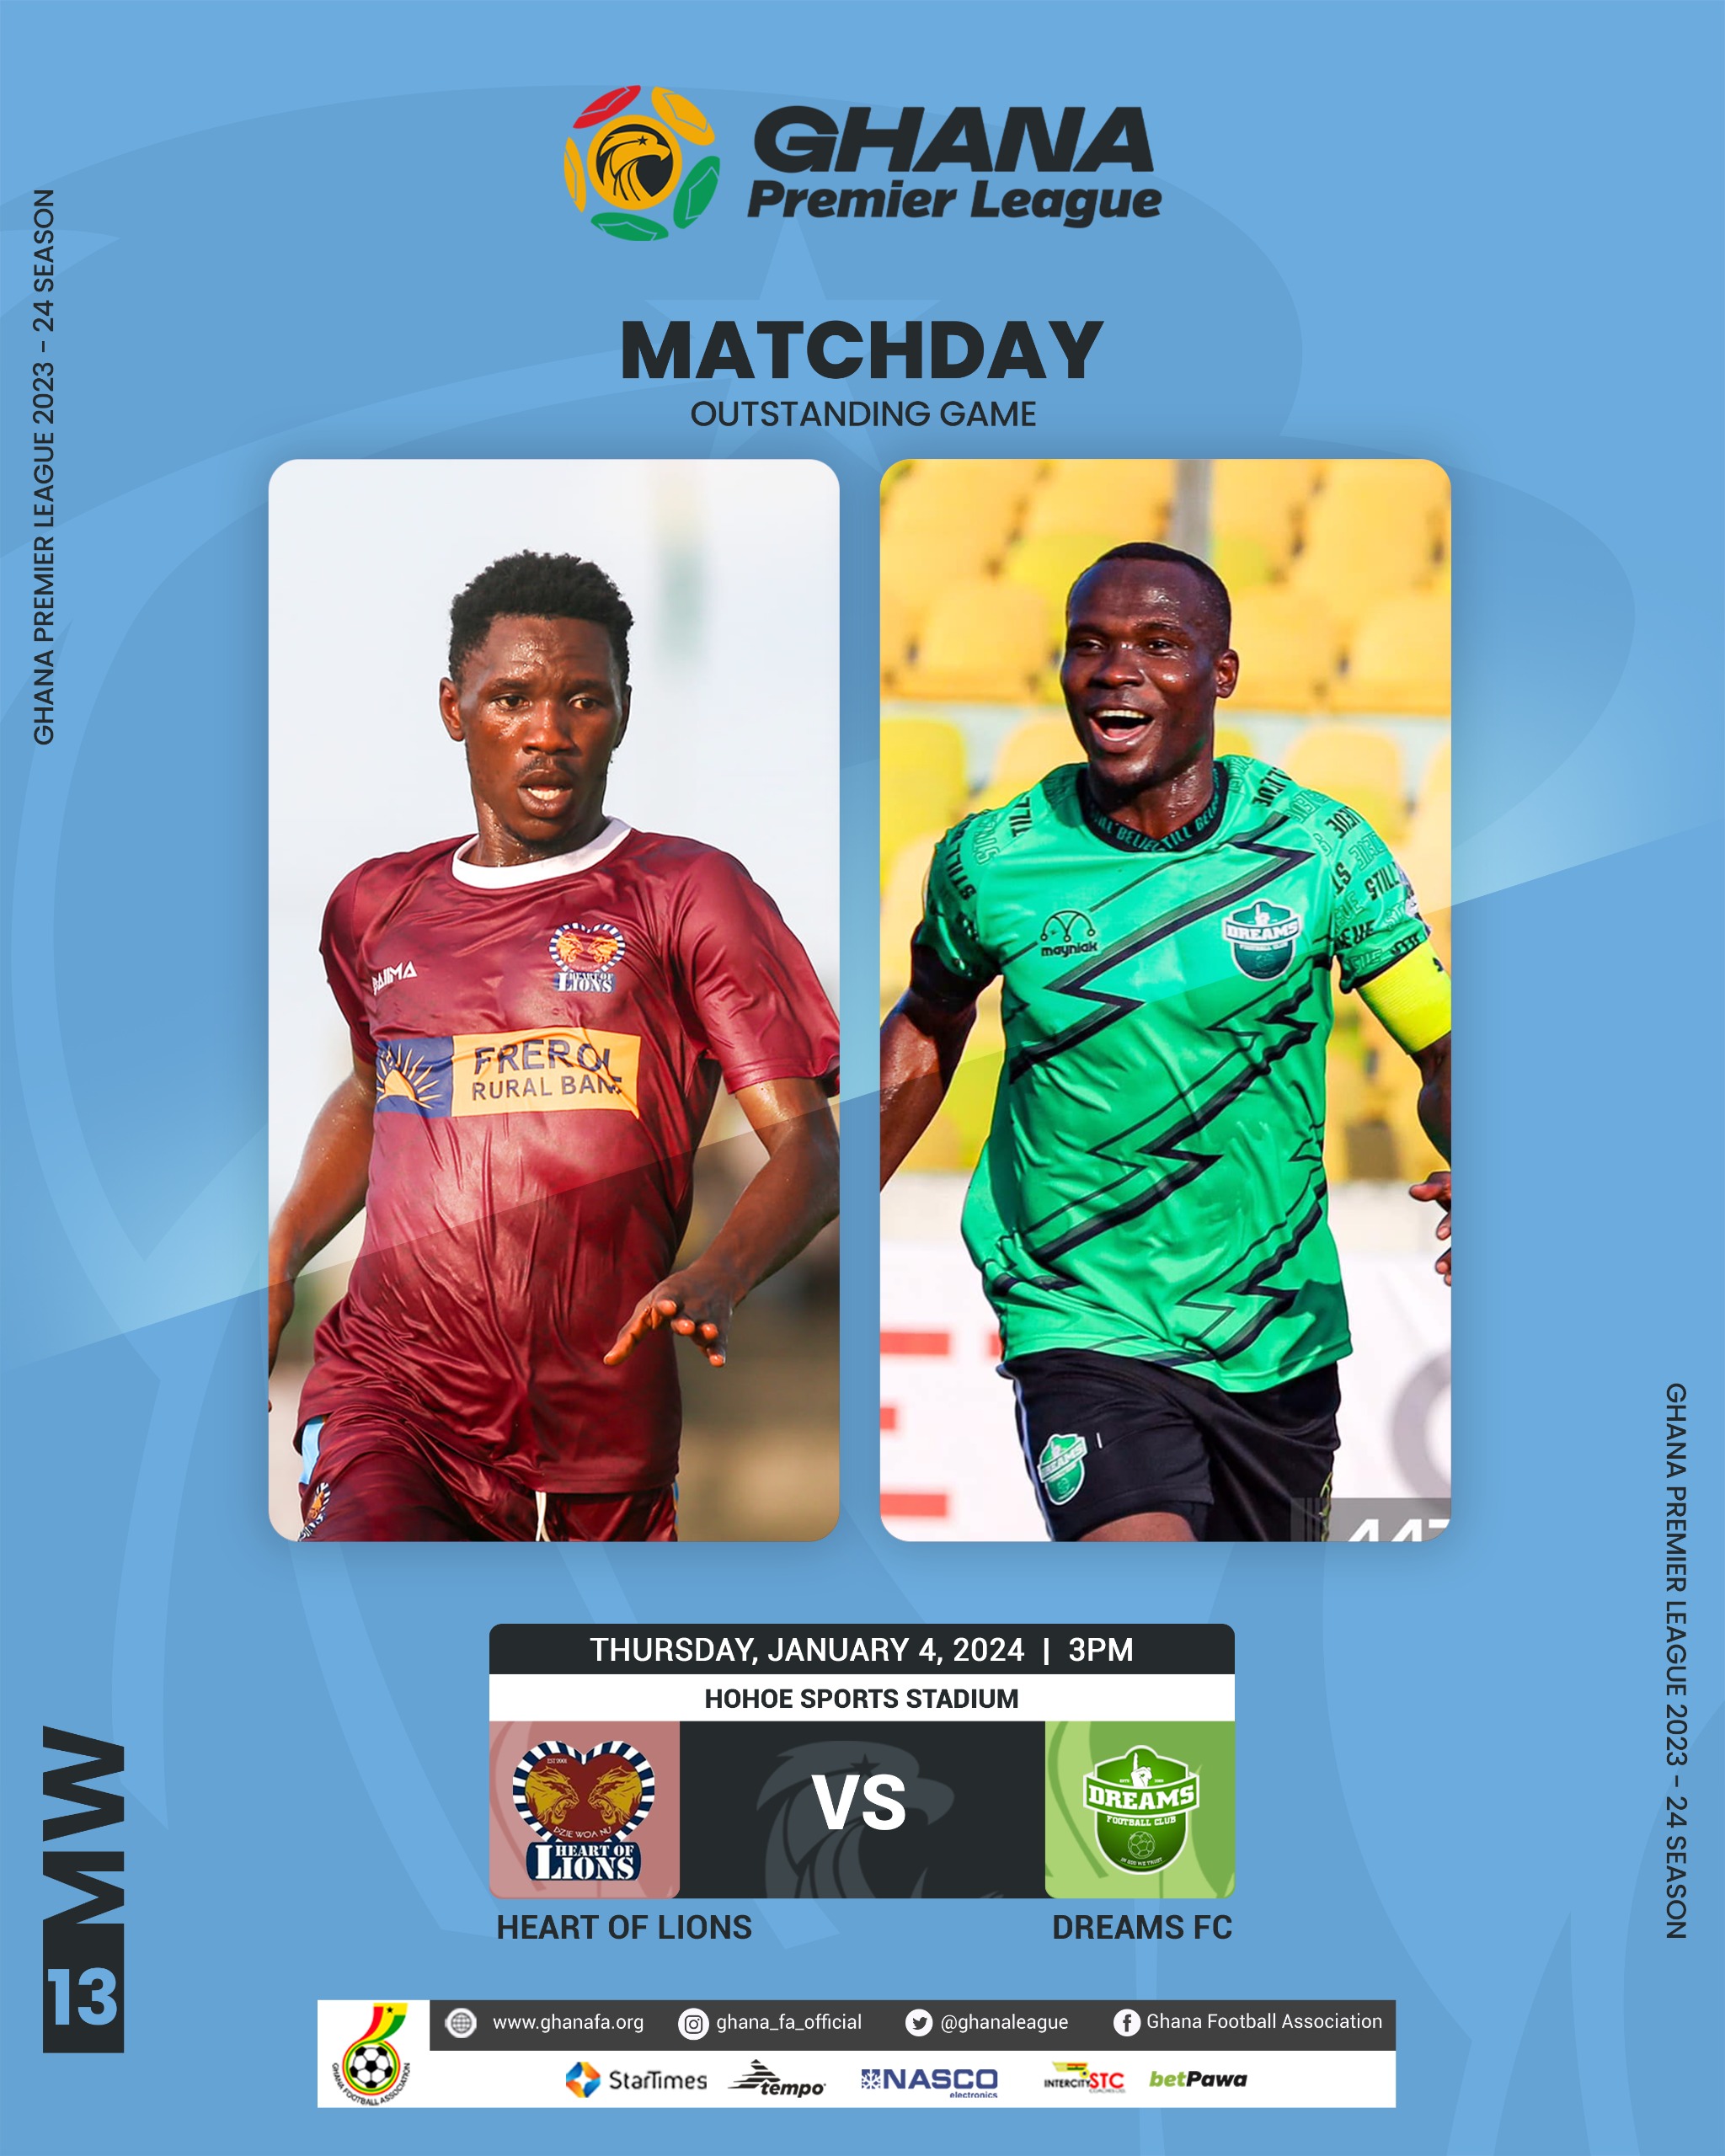 Heart of Lions and Dreams FC clear outstanding game on January 4